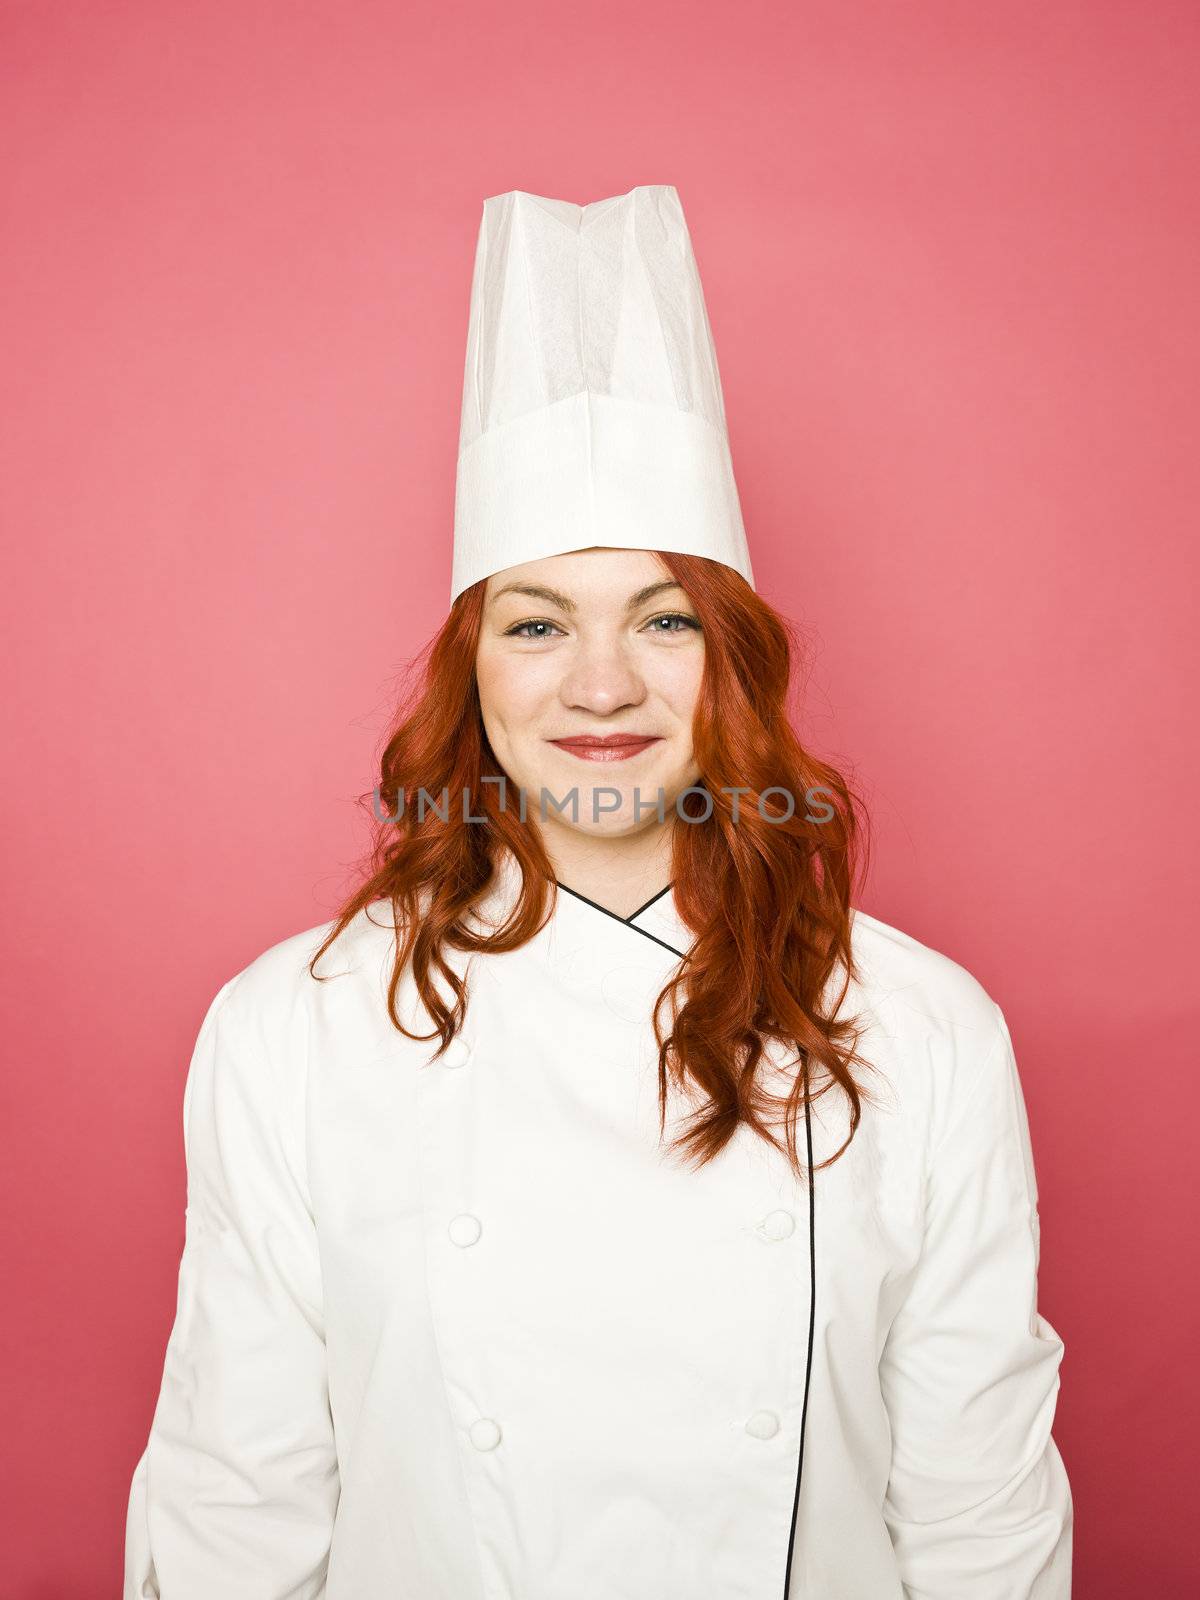 Female Chef on pink background